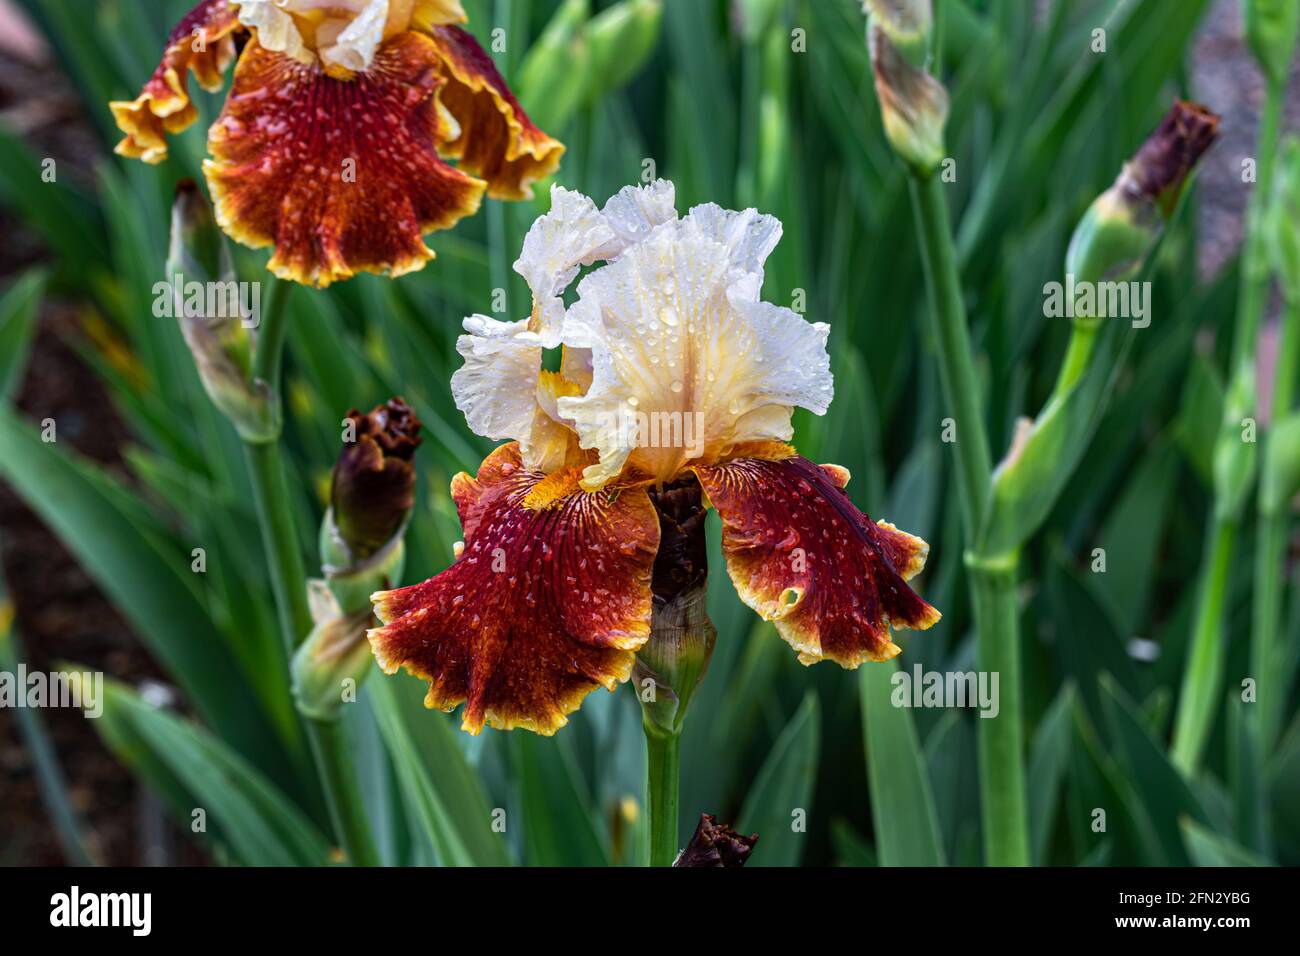 'Hoot' tall bearded iris in bloom. Raindrops on white and red-gold petals. Green plants in background. Stock Photo